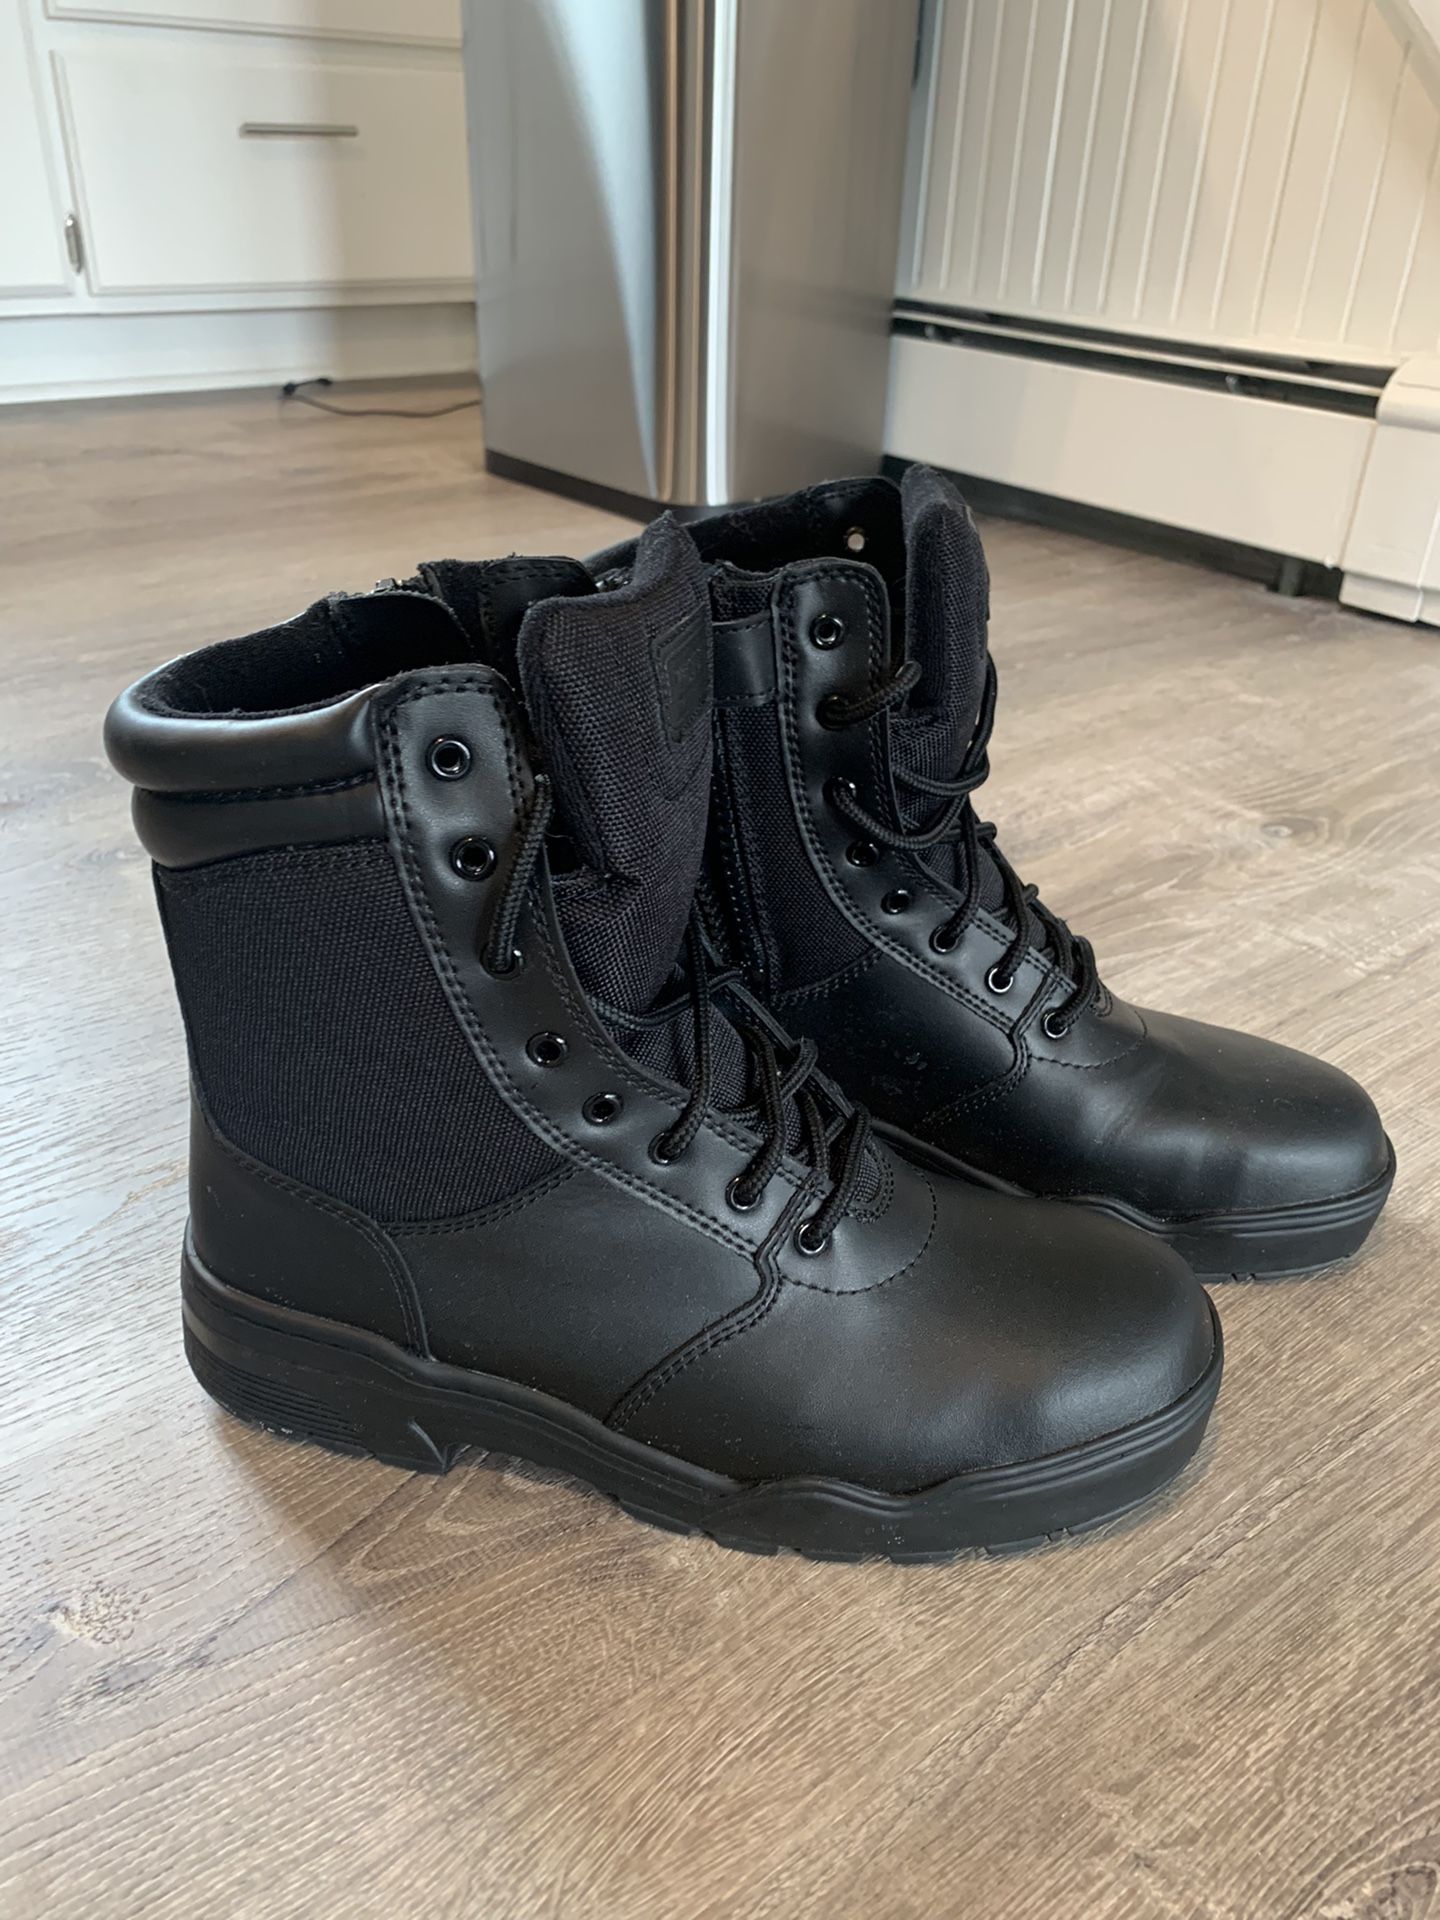 Men’s Size 10.5 Work Boots